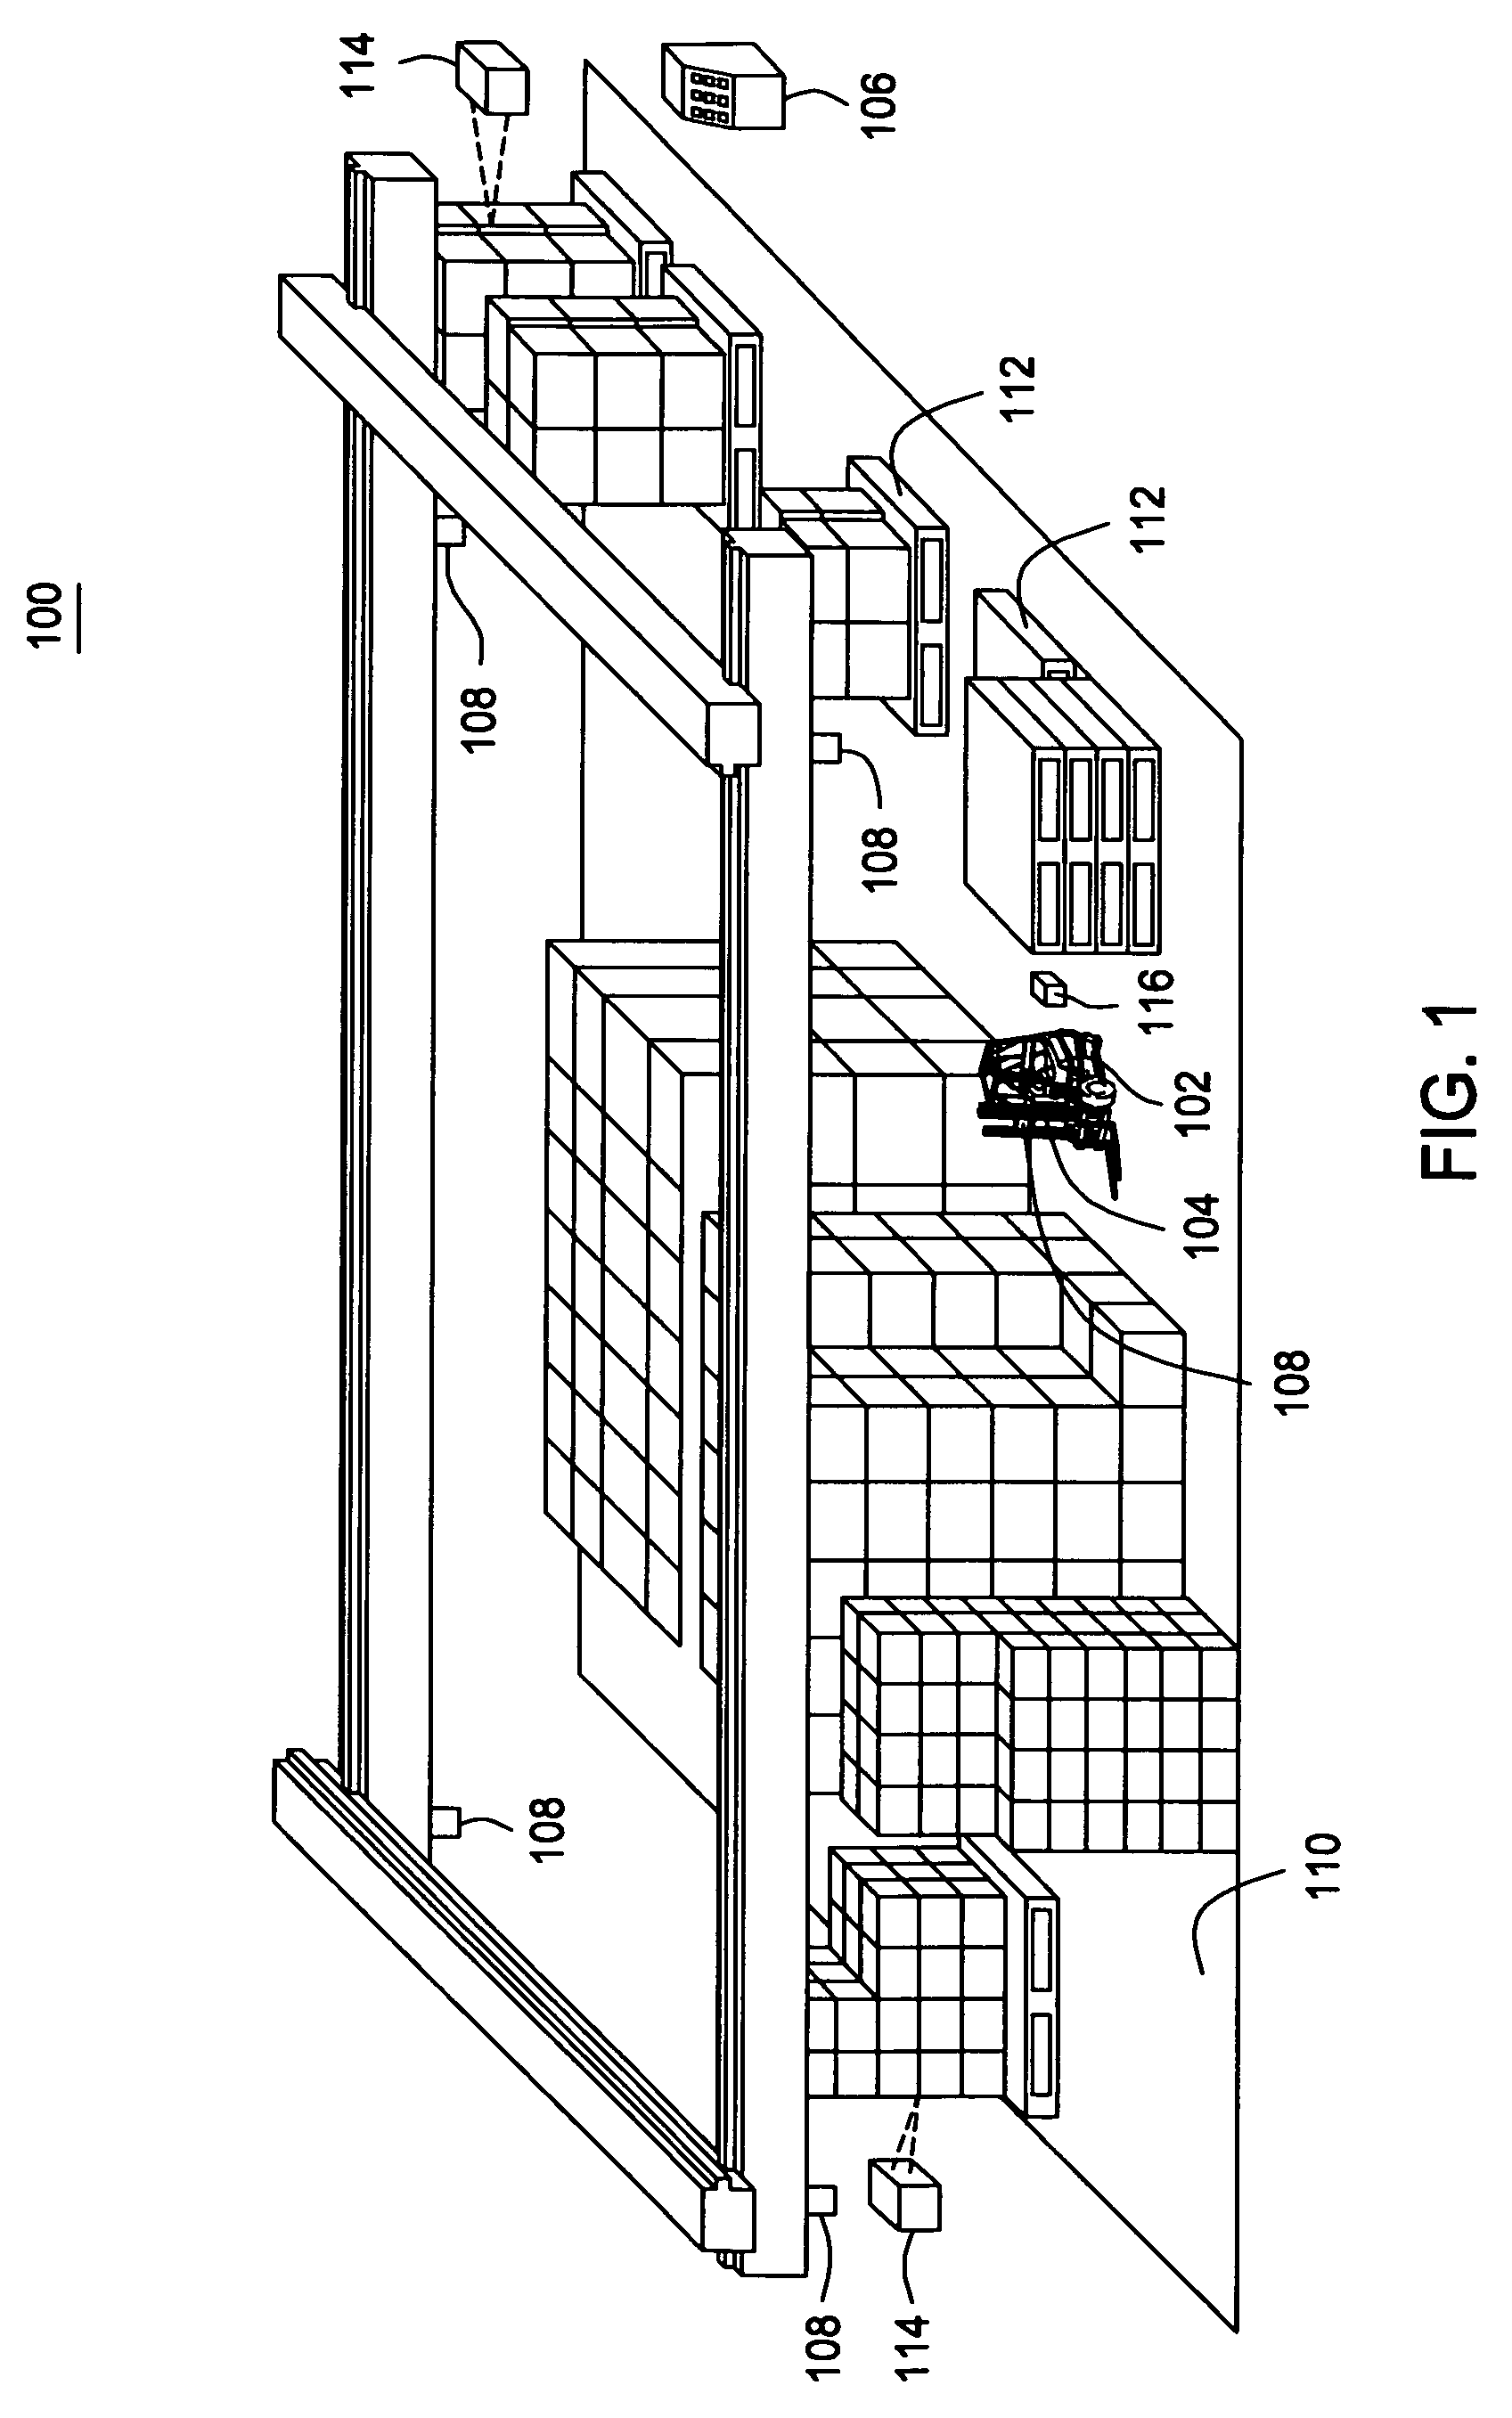 Method and apparatus for simulating a physical environment to facilitate vehicle operation and task completion